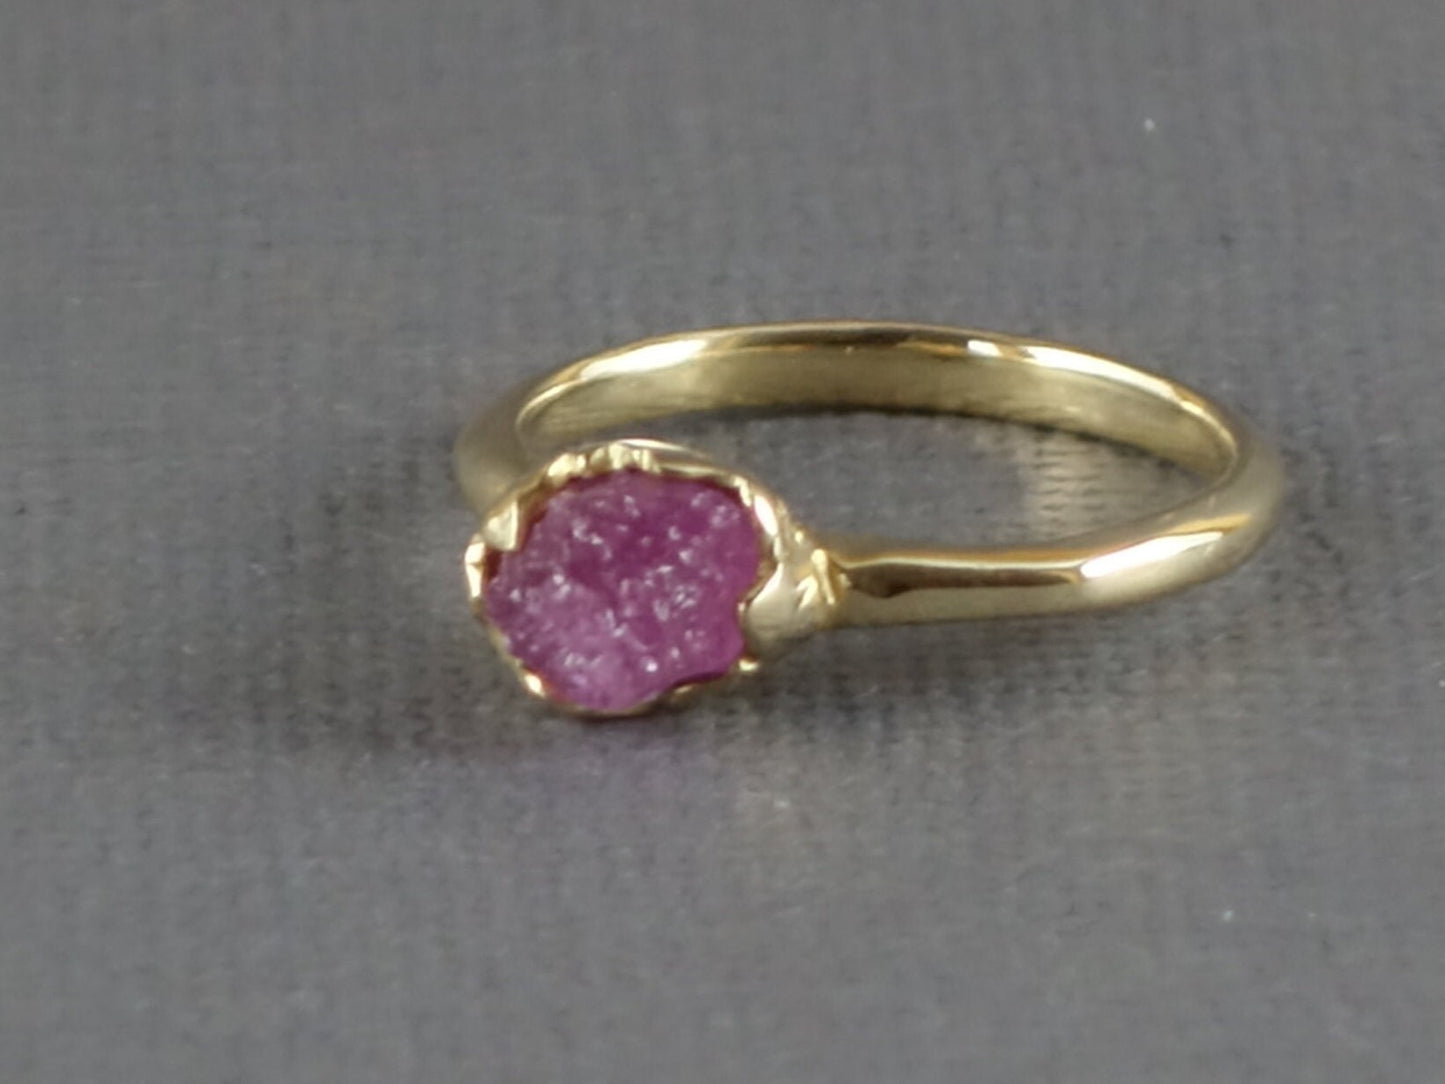 Raw Sapphire Ring, Raw Pink Sapphire Ring, Gold Sapphire Ring, Raw Pink Sapphire and Gold Ring, Uncut Sapphire Ring, Uncut Gemstone ring